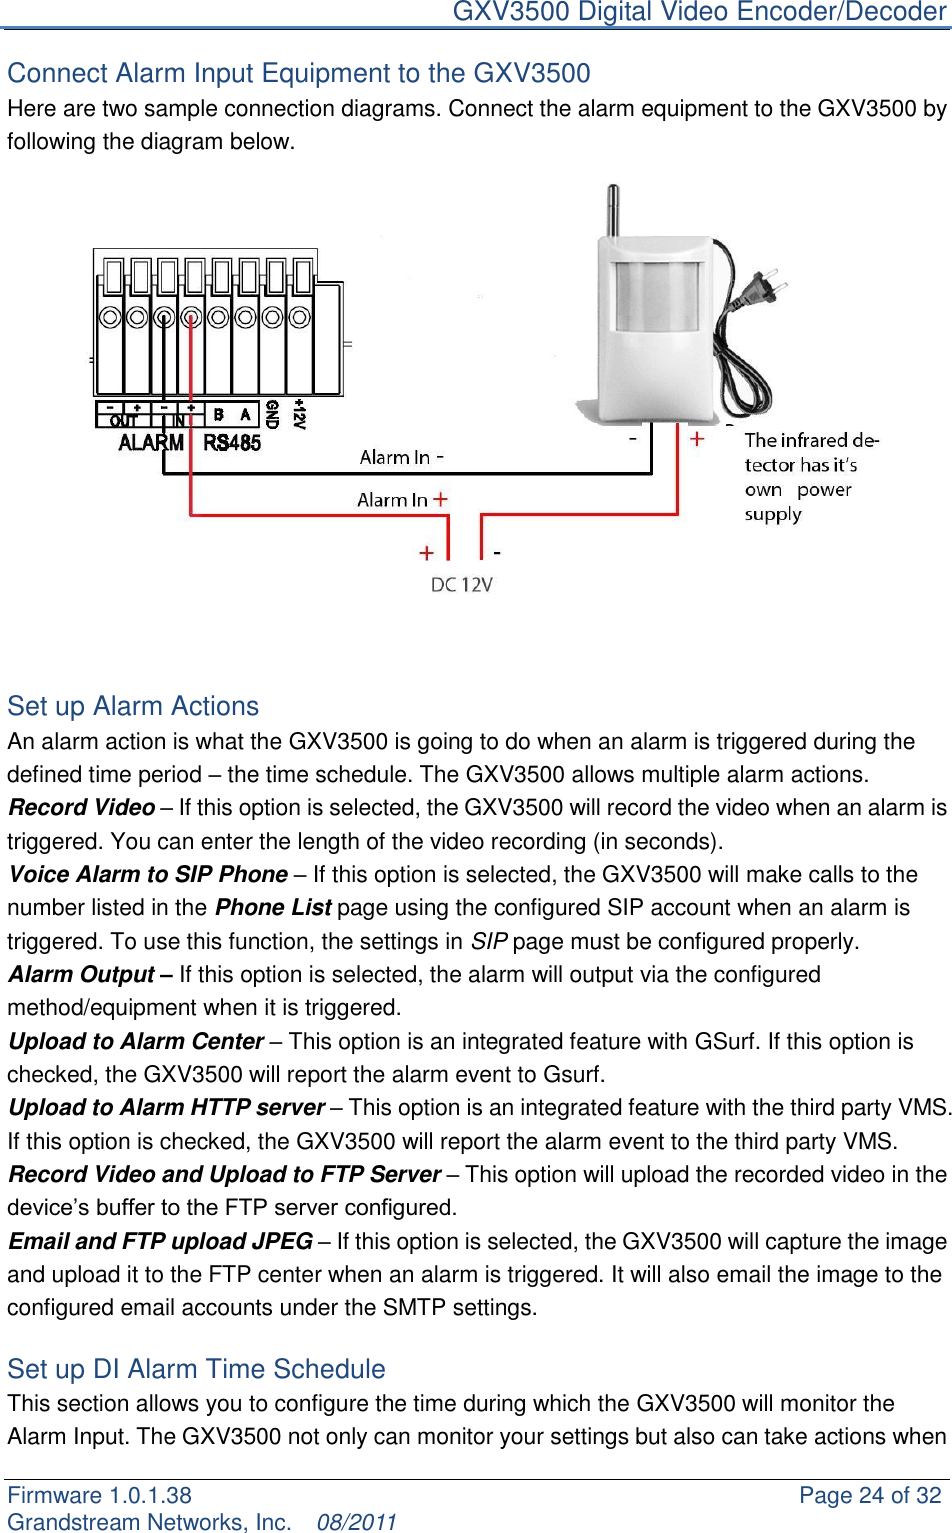     GXV3500 Digital Video Encoder/Decoder Firmware 1.0.1.38                                                     Page 24 of 32     Grandstream Networks, Inc.  08/2011  Connect Alarm Input Equipment to the GXV3500 Here are two sample connection diagrams. Connect the alarm equipment to the GXV3500 by following the diagram below.      Set up Alarm Actions An alarm action is what the GXV3500 is going to do when an alarm is triggered during the defined time period – the time schedule. The GXV3500 allows multiple alarm actions.   Record Video – If this option is selected, the GXV3500 will record the video when an alarm is triggered. You can enter the length of the video recording (in seconds).     Voice Alarm to SIP Phone – If this option is selected, the GXV3500 will make calls to the number listed in the Phone List page using the configured SIP account when an alarm is triggered. To use this function, the settings in SIP page must be configured properly. Alarm Output – If this option is selected, the alarm will output via the configured method/equipment when it is triggered. Upload to Alarm Center – This option is an integrated feature with GSurf. If this option is checked, the GXV3500 will report the alarm event to Gsurf. Upload to Alarm HTTP server – This option is an integrated feature with the third party VMS. If this option is checked, the GXV3500 will report the alarm event to the third party VMS. Record Video and Upload to FTP Server – This option will upload the recorded video in the device‟s buffer to the FTP server configured. Email and FTP upload JPEG – If this option is selected, the GXV3500 will capture the image and upload it to the FTP center when an alarm is triggered. It will also email the image to the configured email accounts under the SMTP settings.  Set up DI Alarm Time Schedule   This section allows you to configure the time during which the GXV3500 will monitor the Alarm Input. The GXV3500 not only can monitor your settings but also can take actions when 